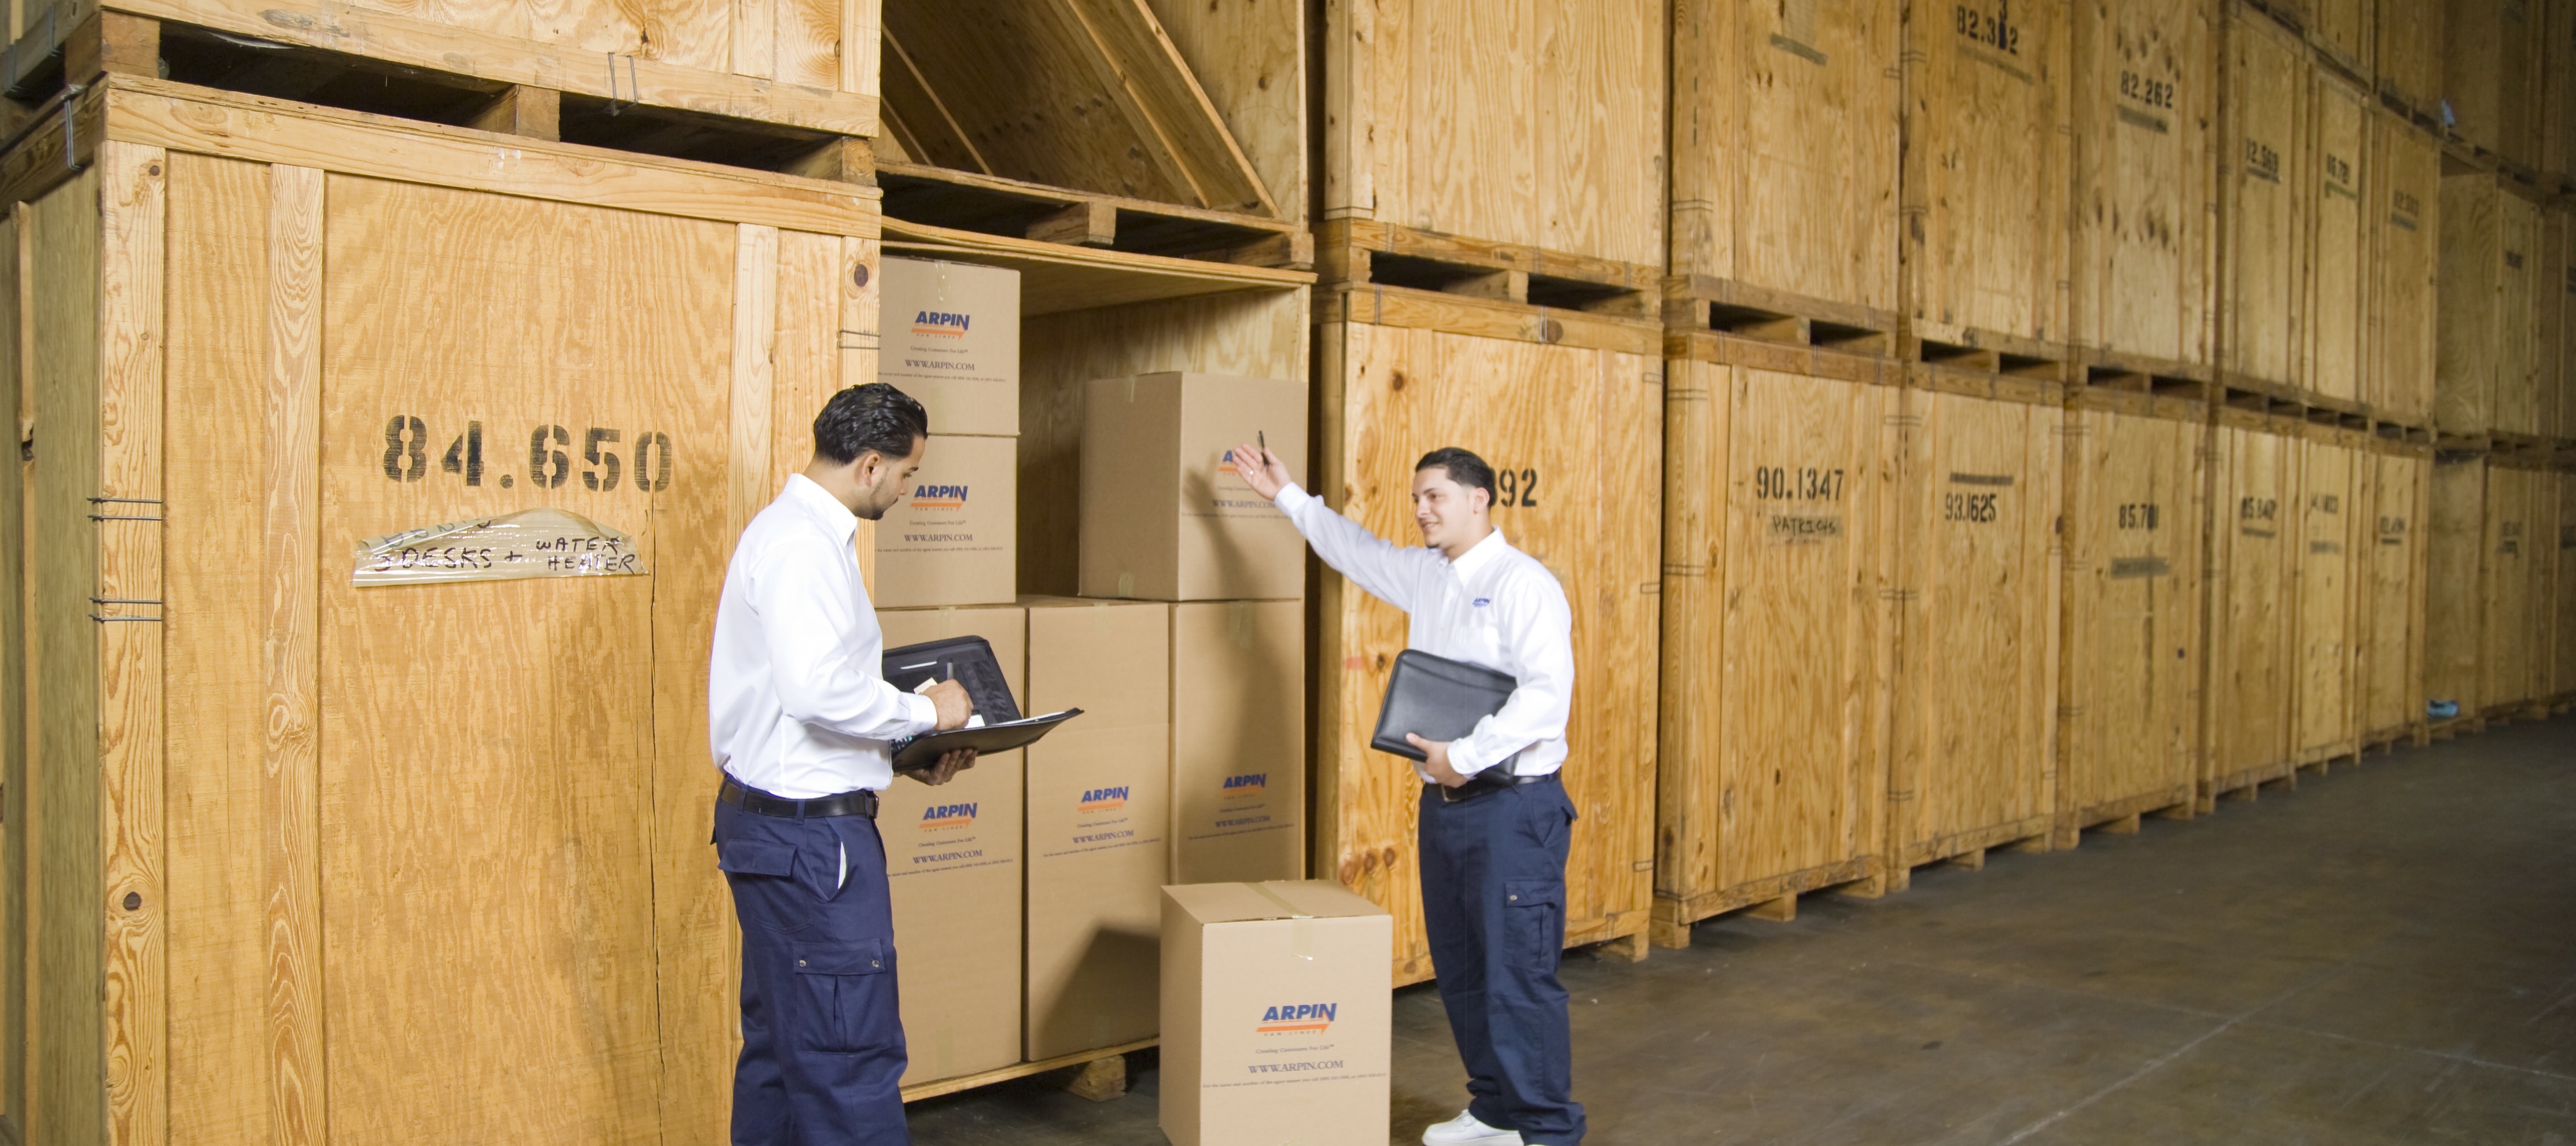 Two men taking inventory outside a storage unit